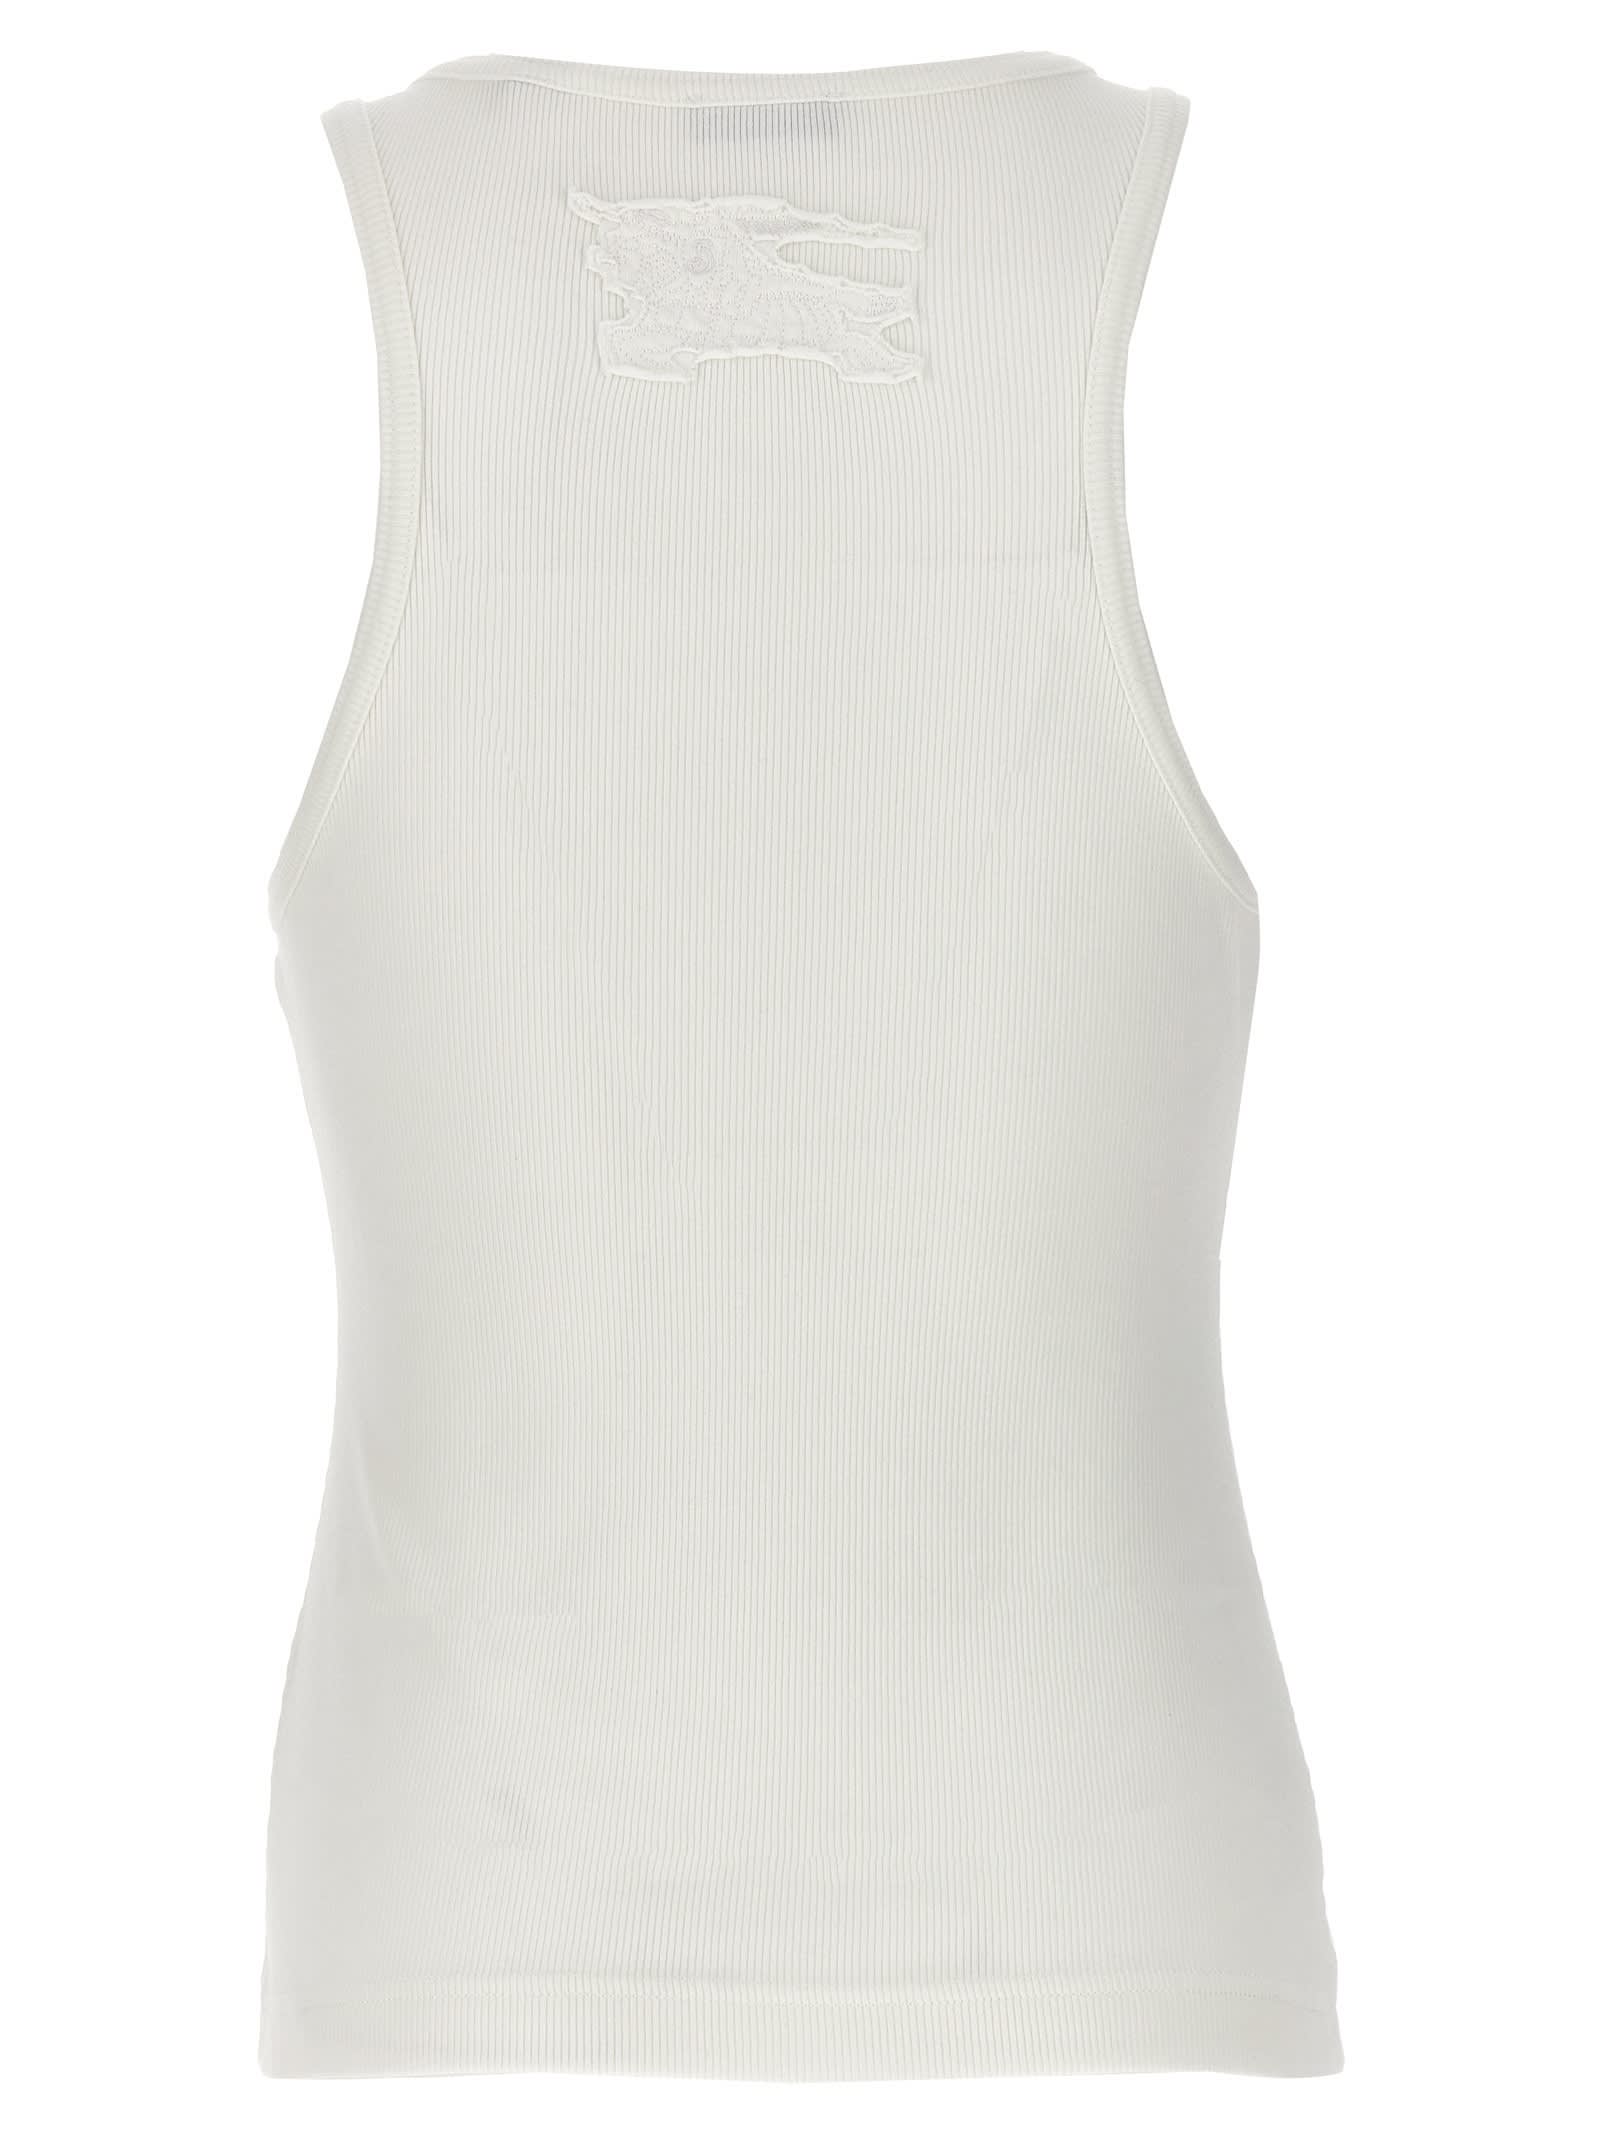 Shop Burberry Logo Embroidery Tank Top In White